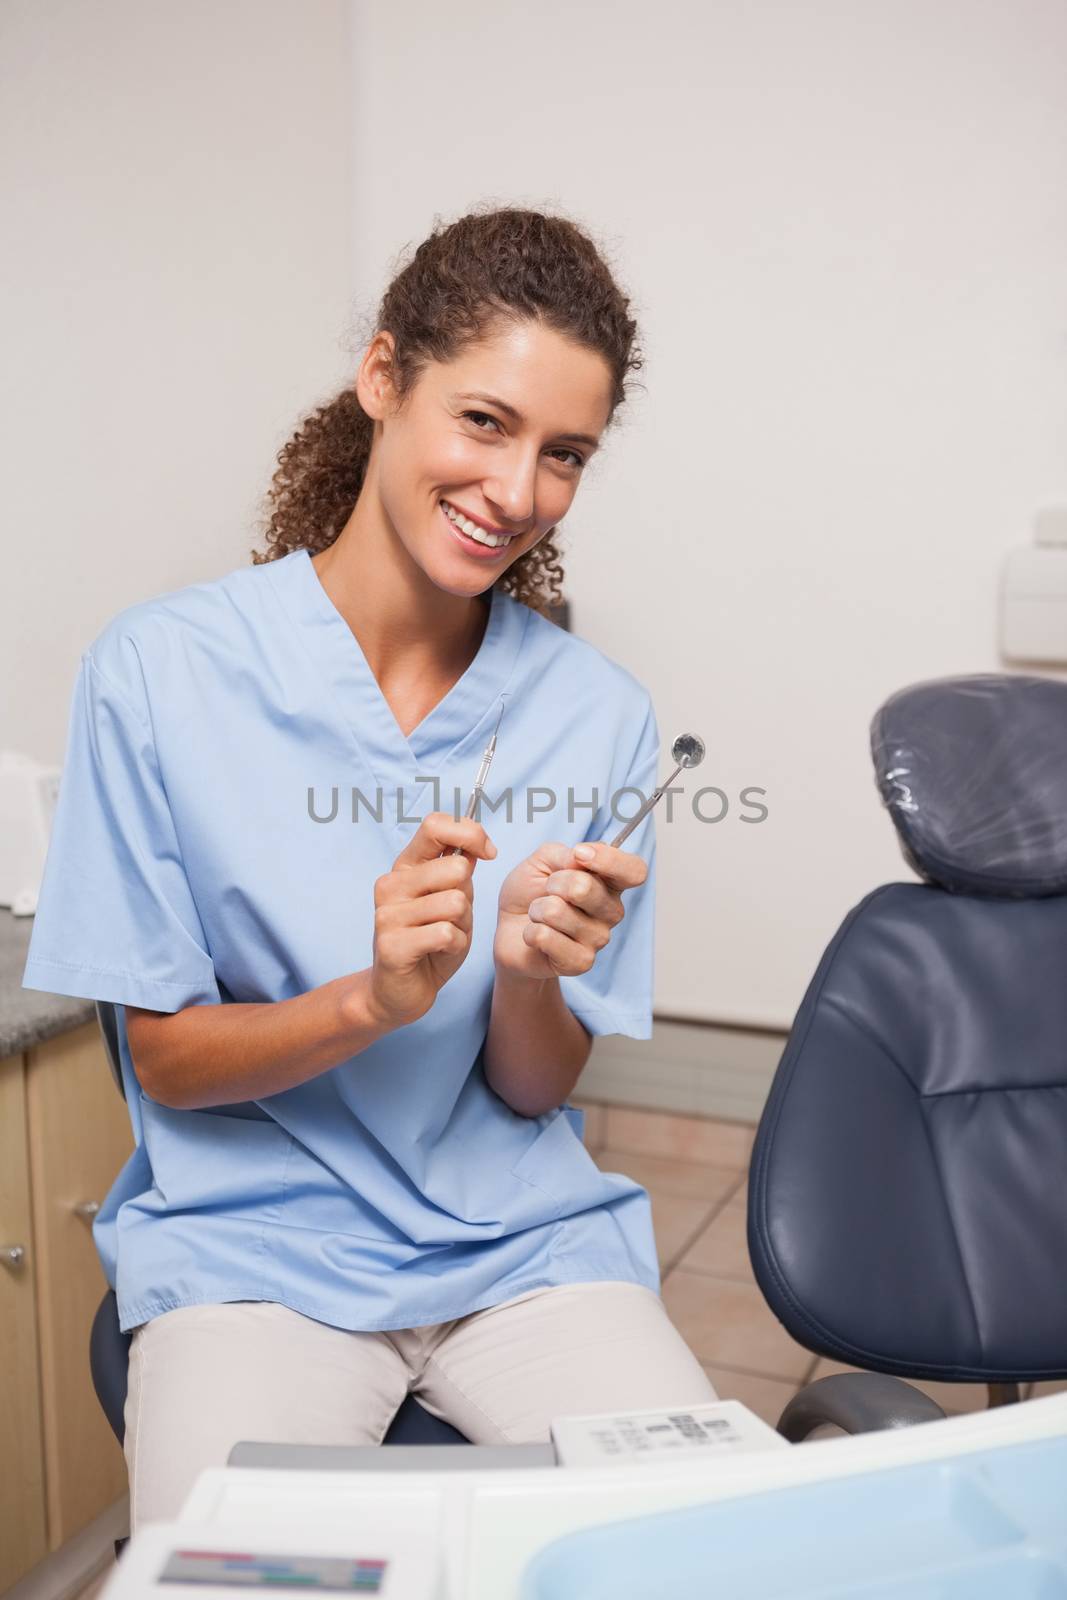 Dentist in blue scrubs smiling at camera holding tools at the dental clinic